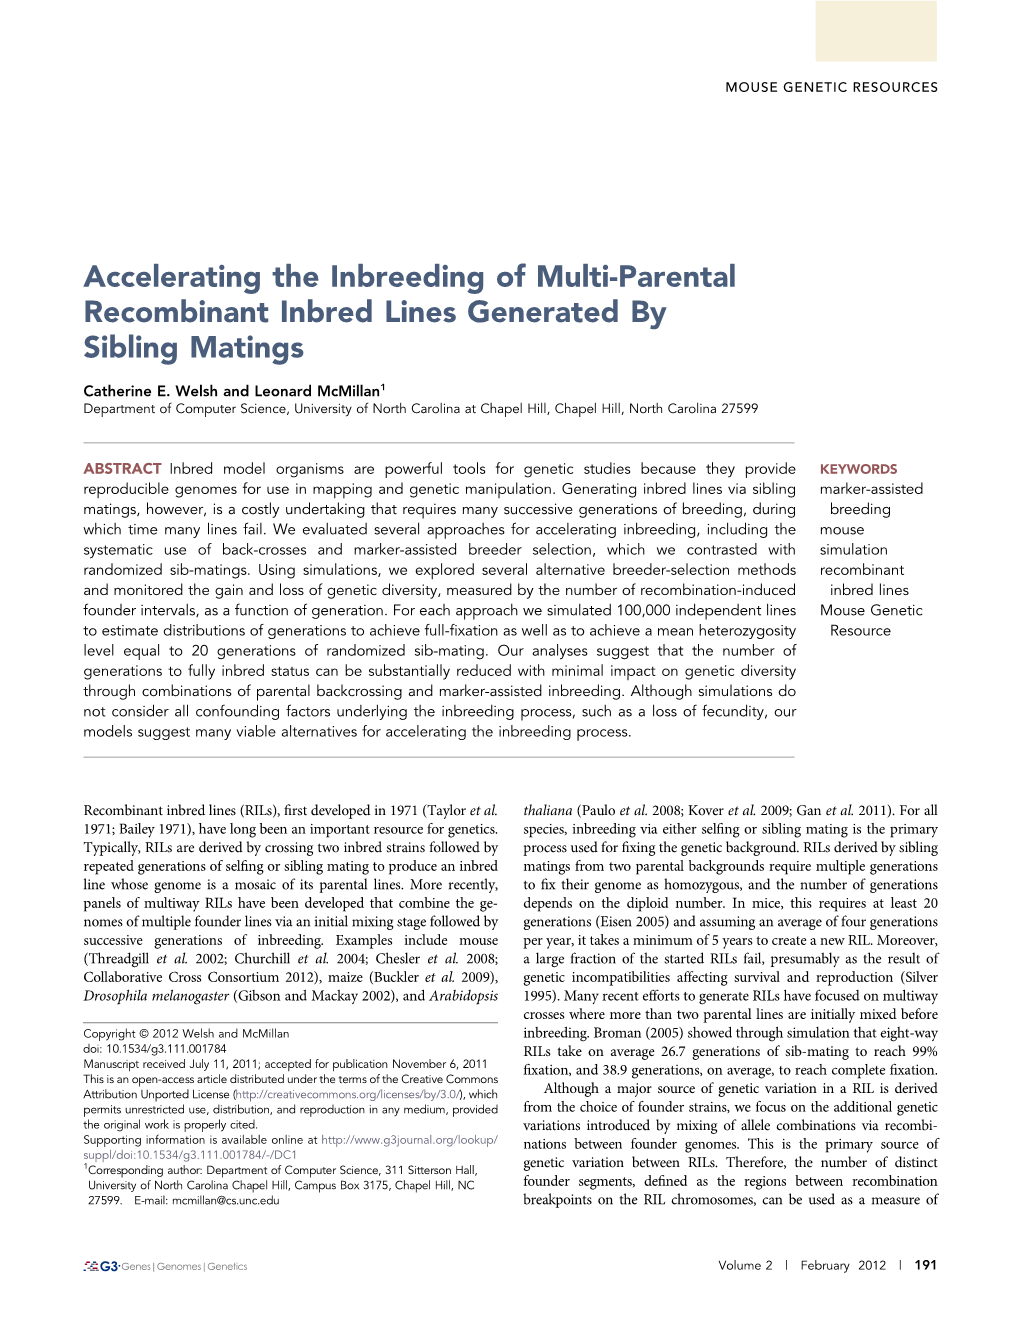 Accelerating the Inbreeding of Multi-Parental Recombinant Inbred Lines Generated by Sibling Matings